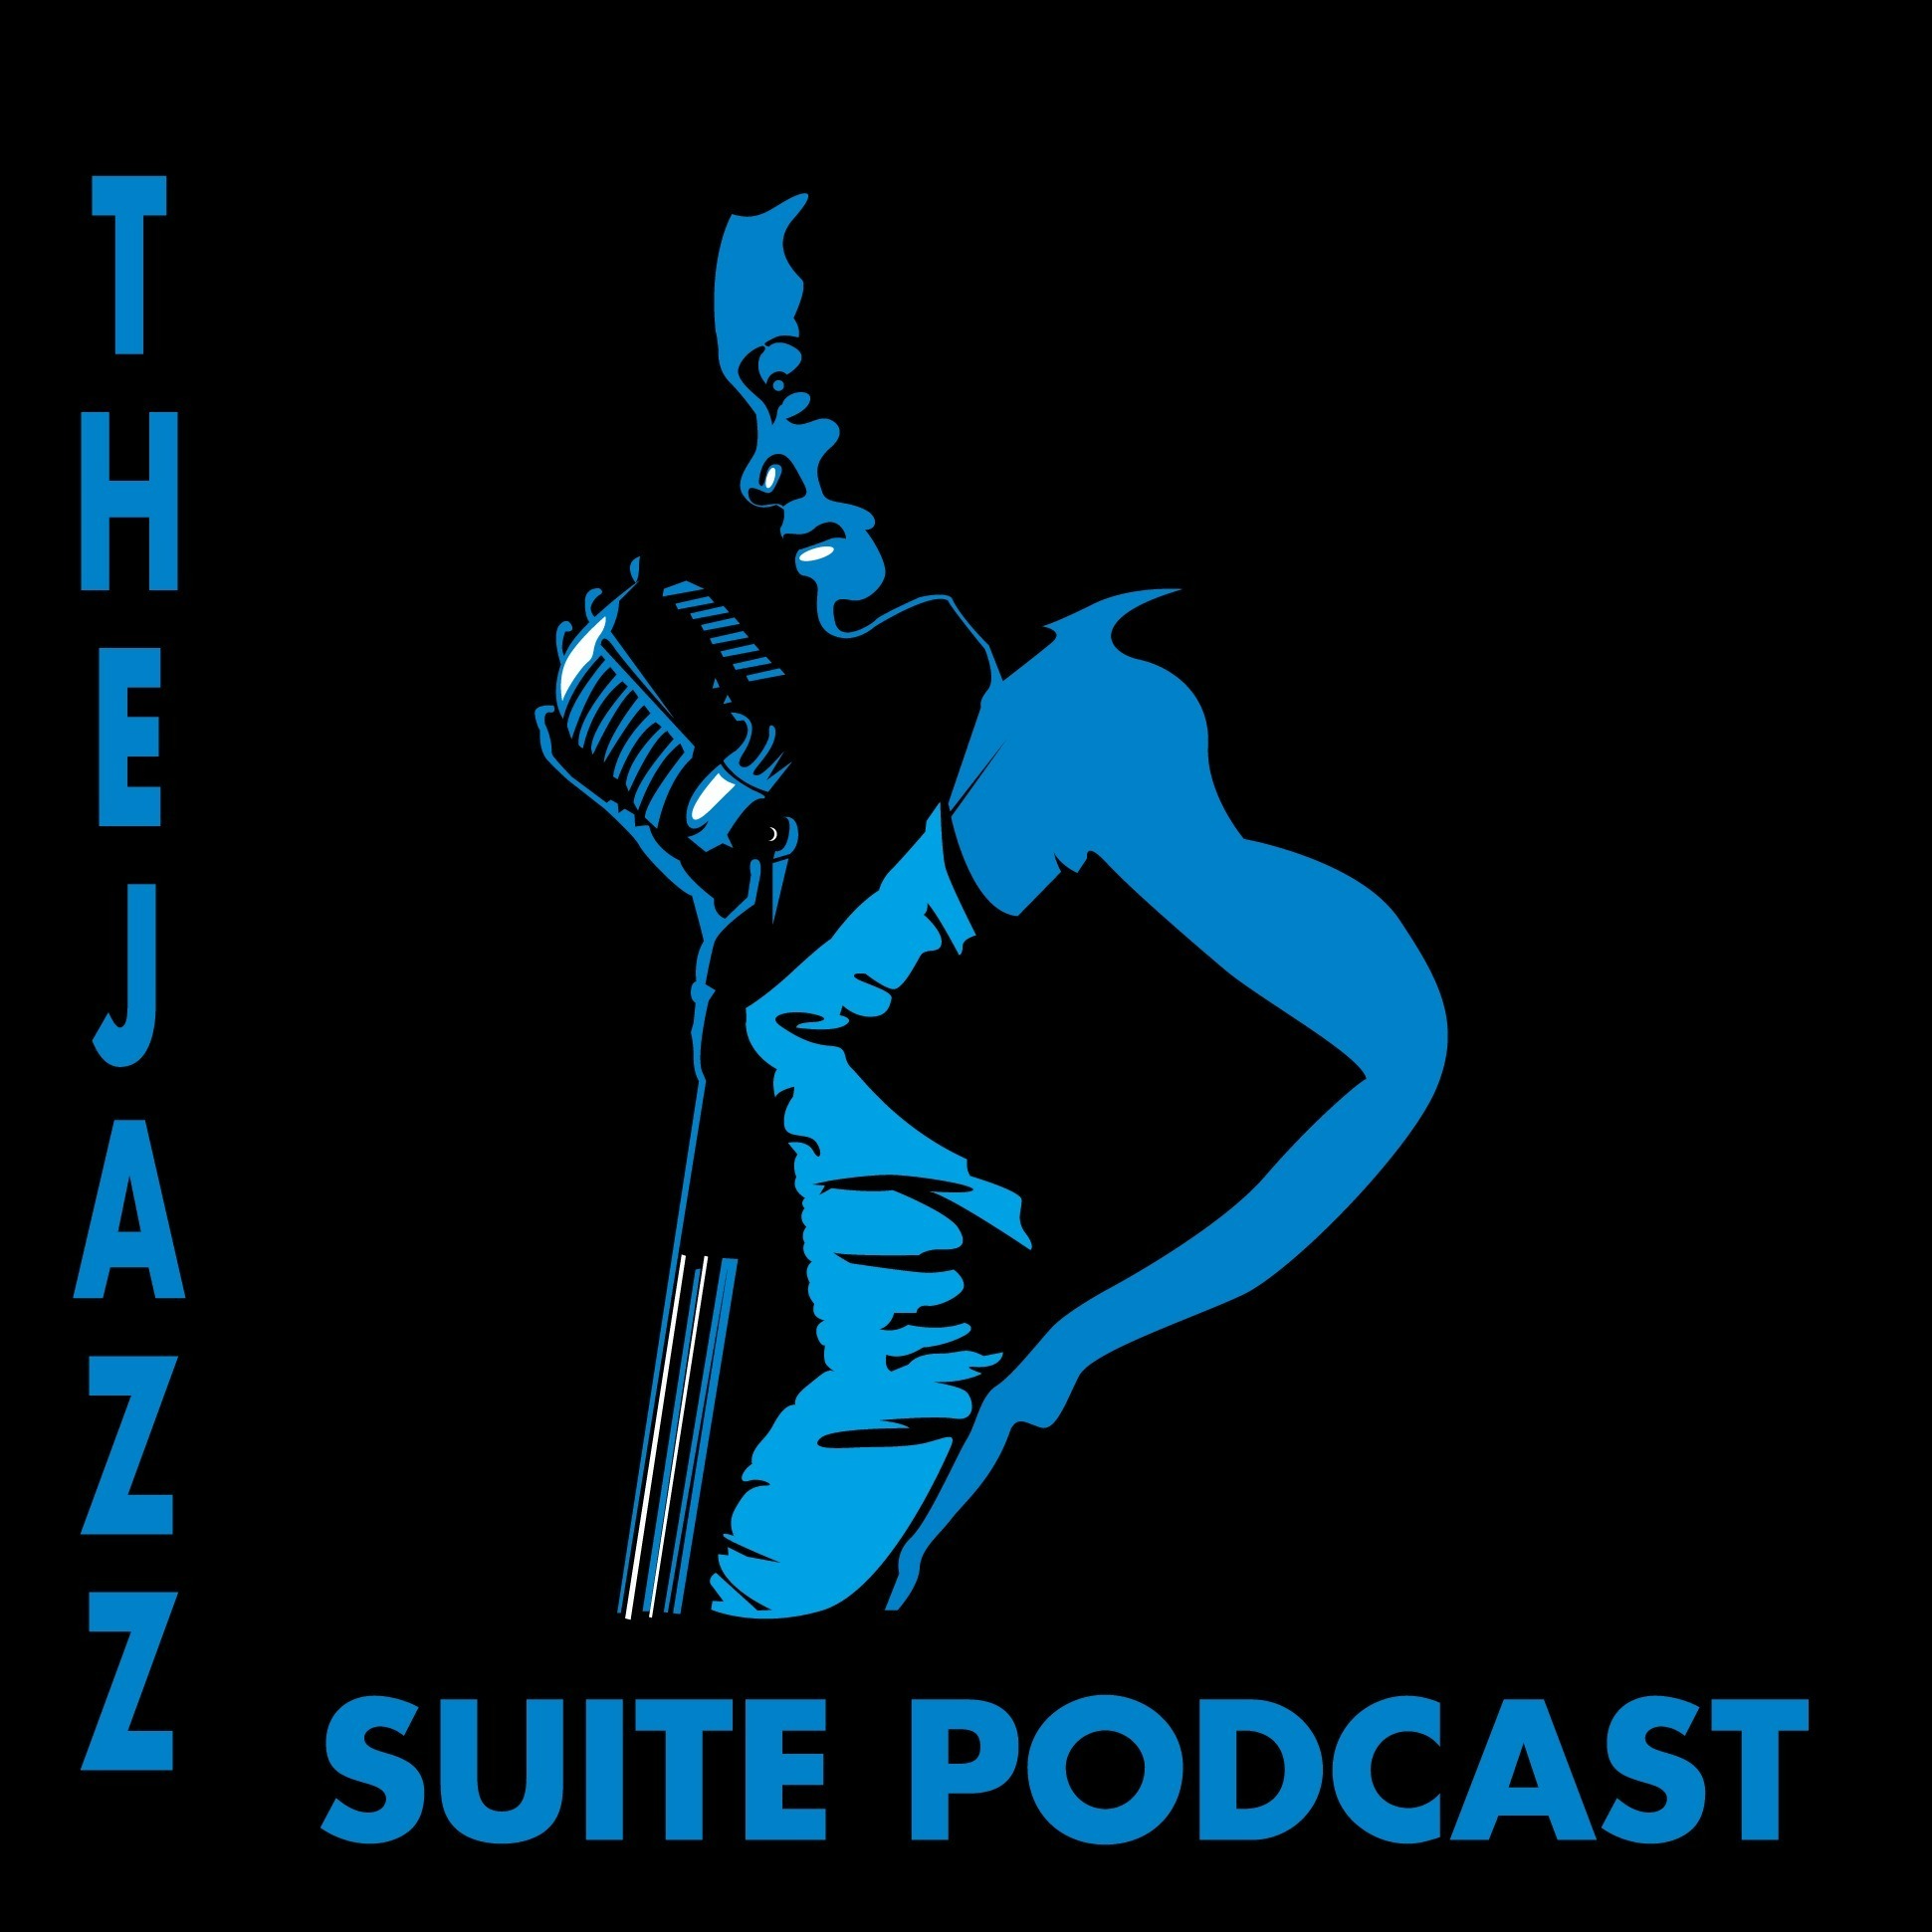 The Jazz Suite Podcast Show #468